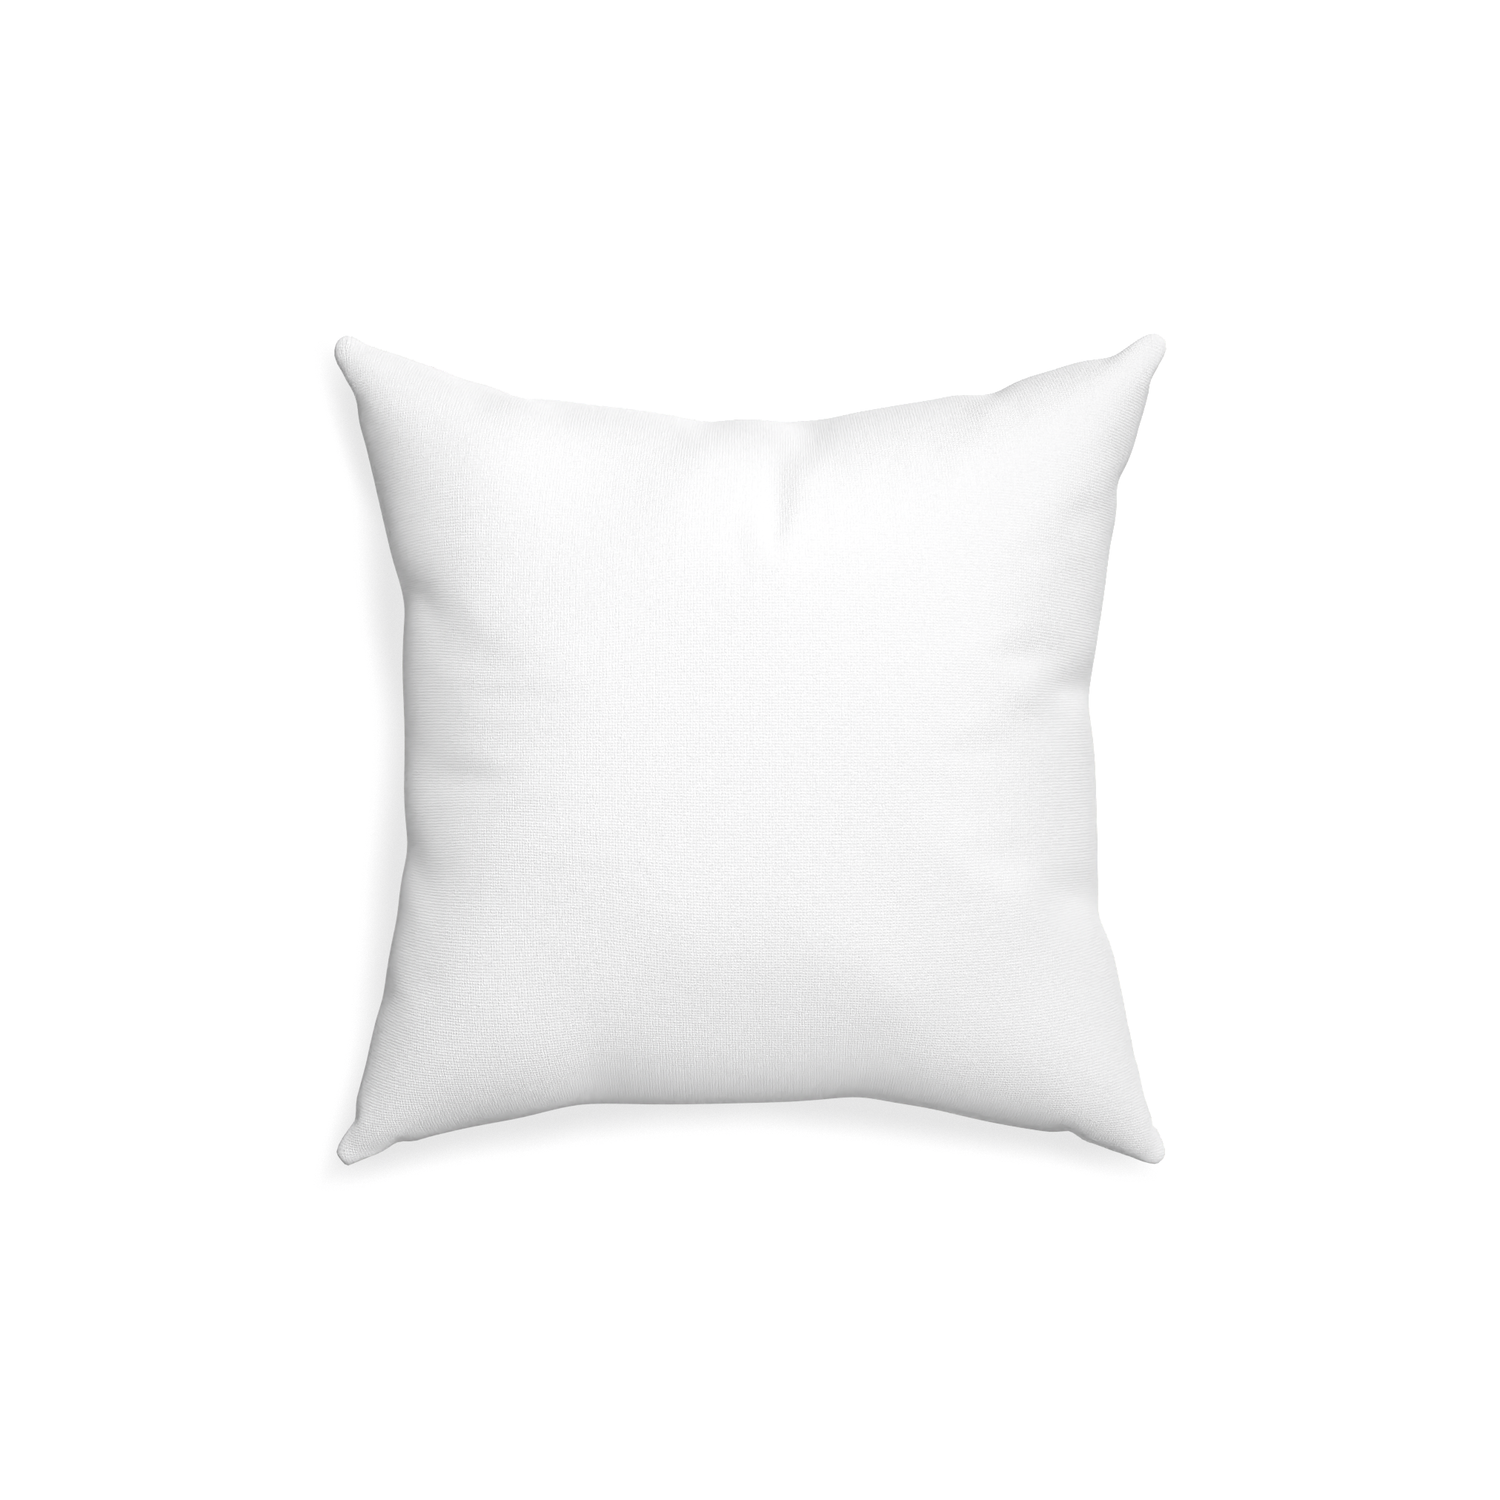 18-square snow custom white cottonpillow with none on white background